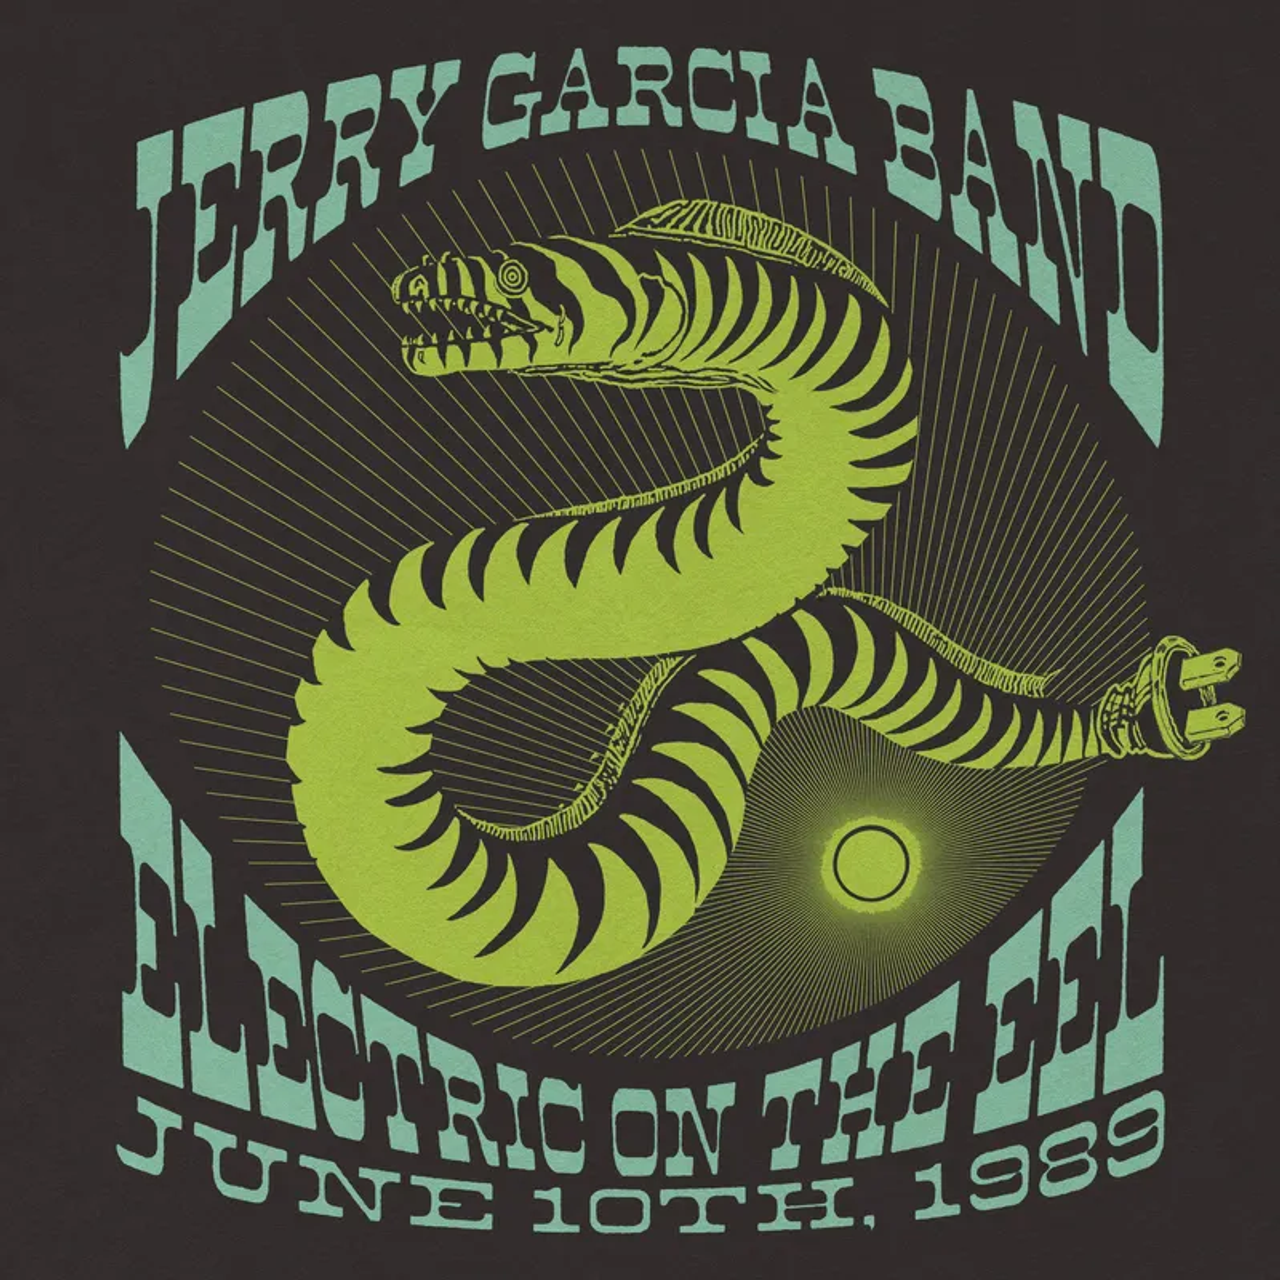 Electric On The Eel: June 10th, 1989 - Jerry Garcia Band (4LP Box 